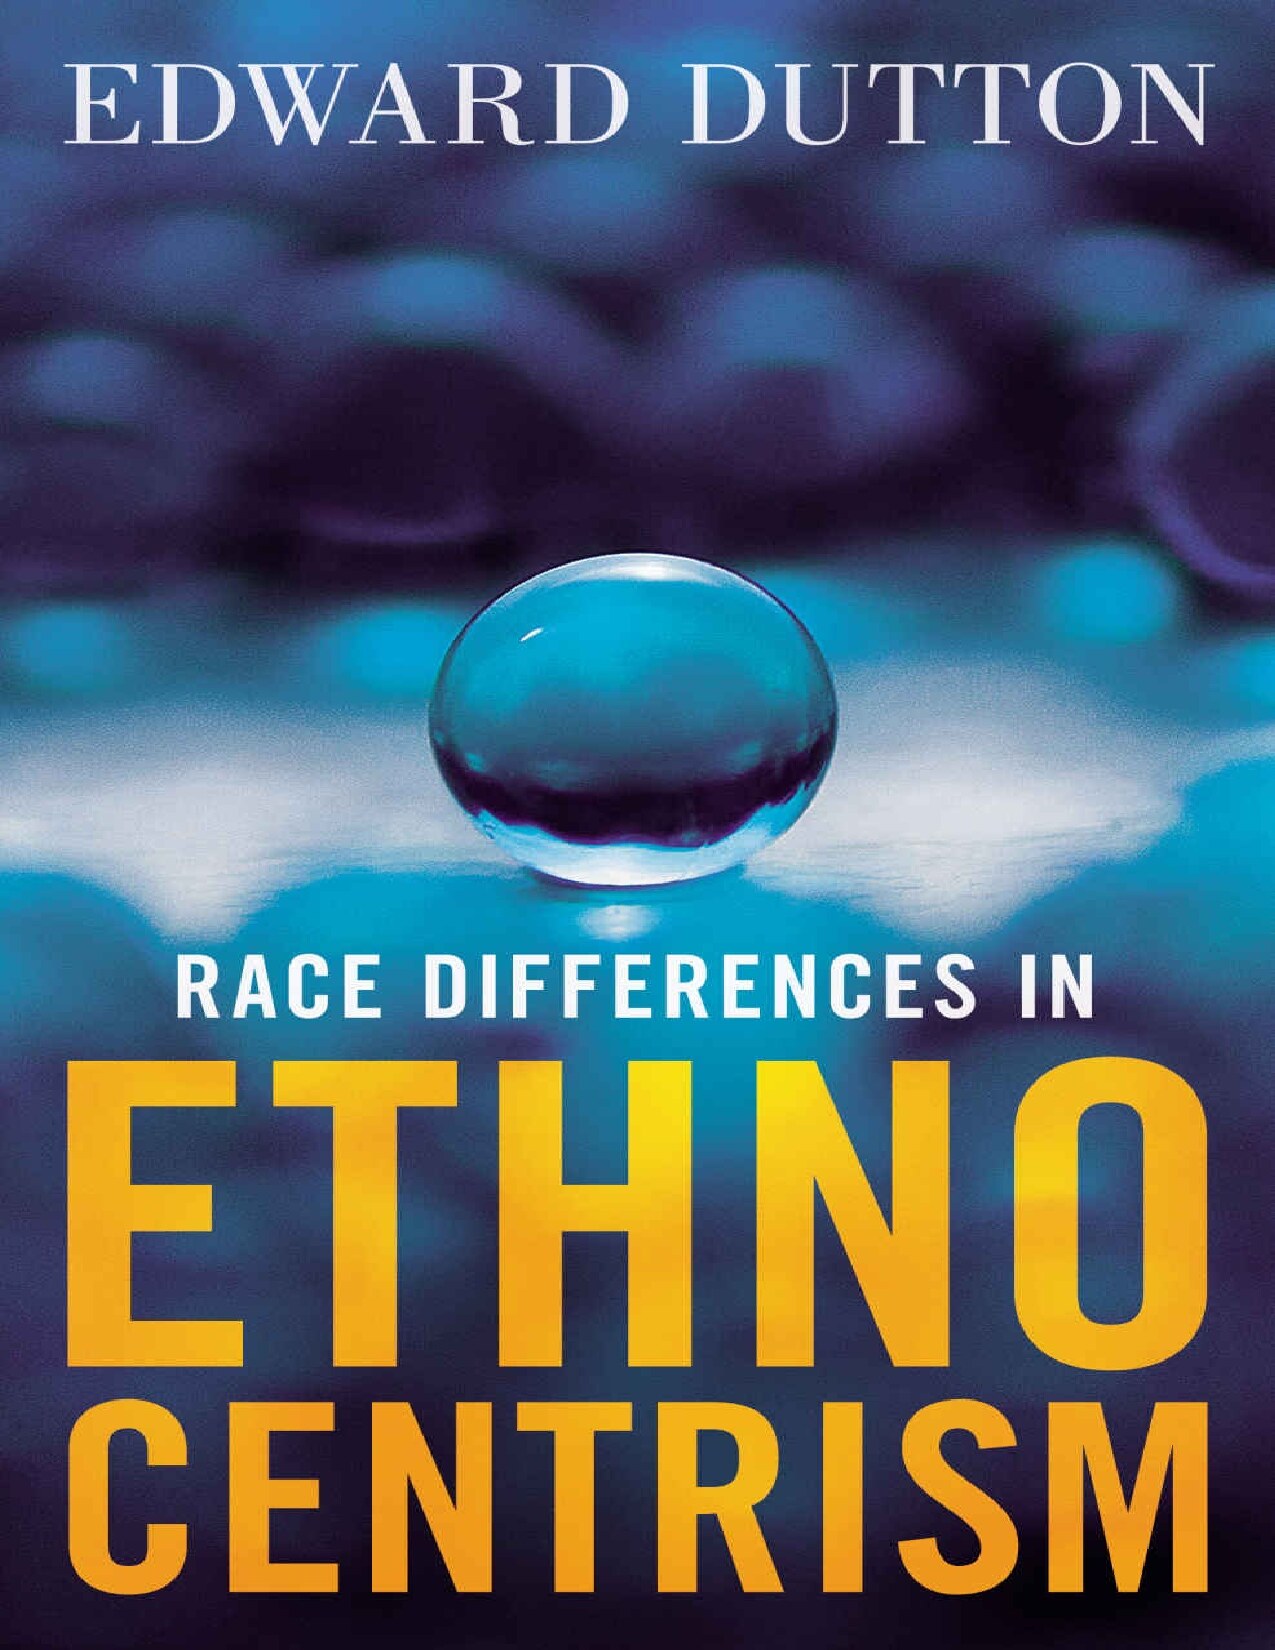 Race Differences in Ethnocentrism